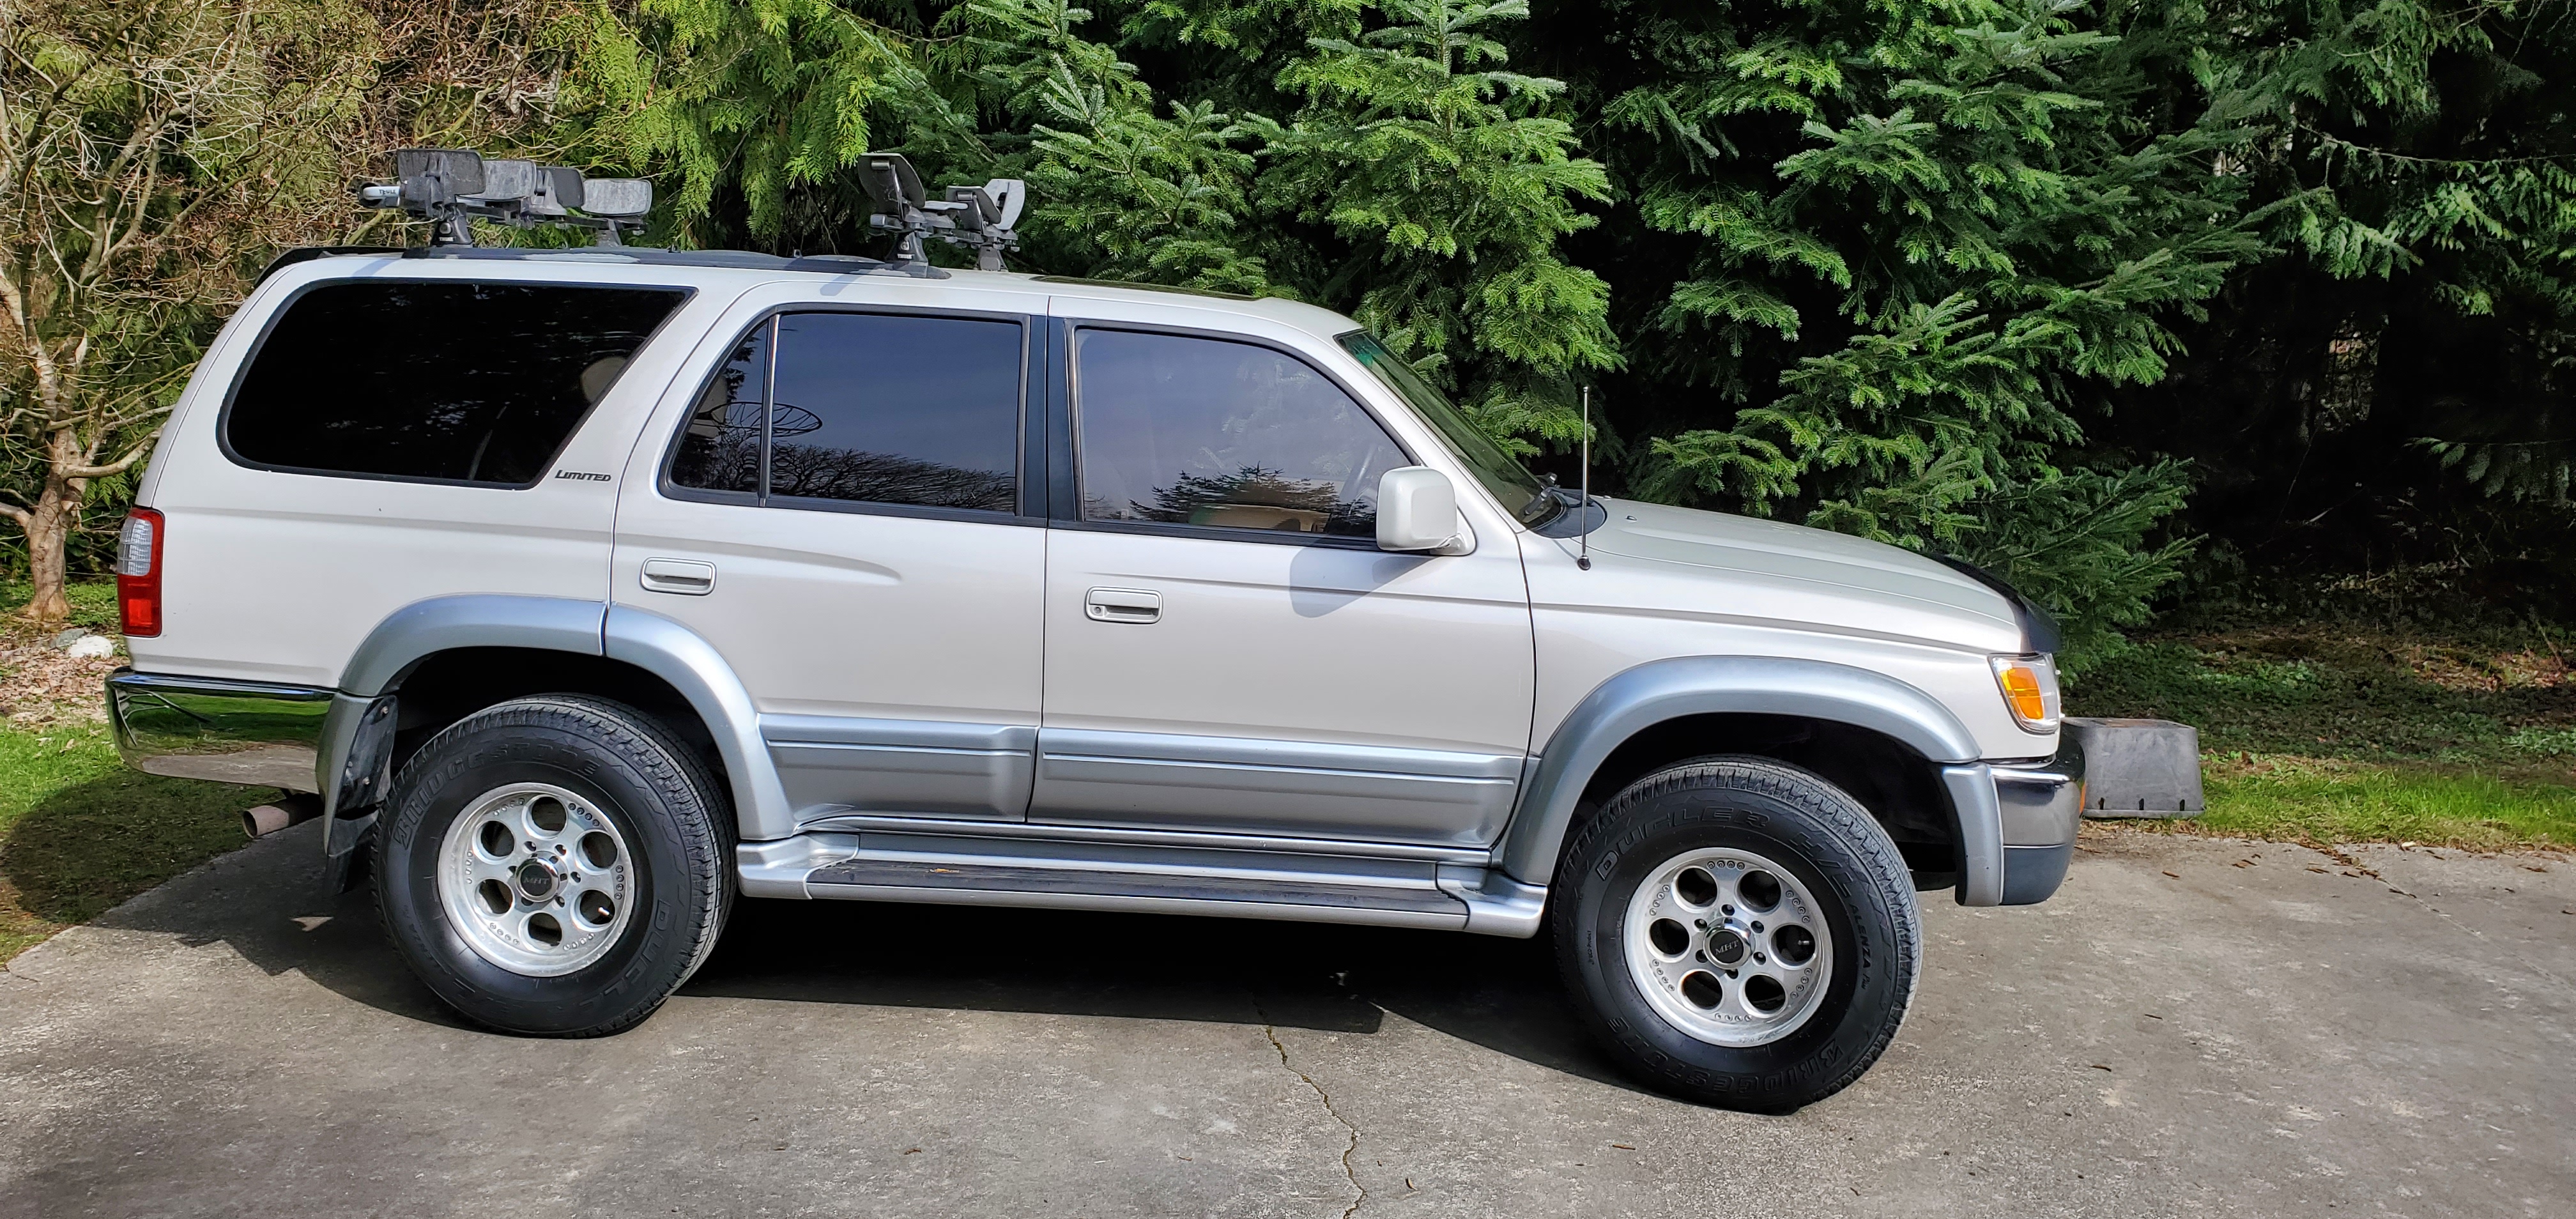 Used 1997 Toyota 4Runner for Sale Near Me | Cars.com